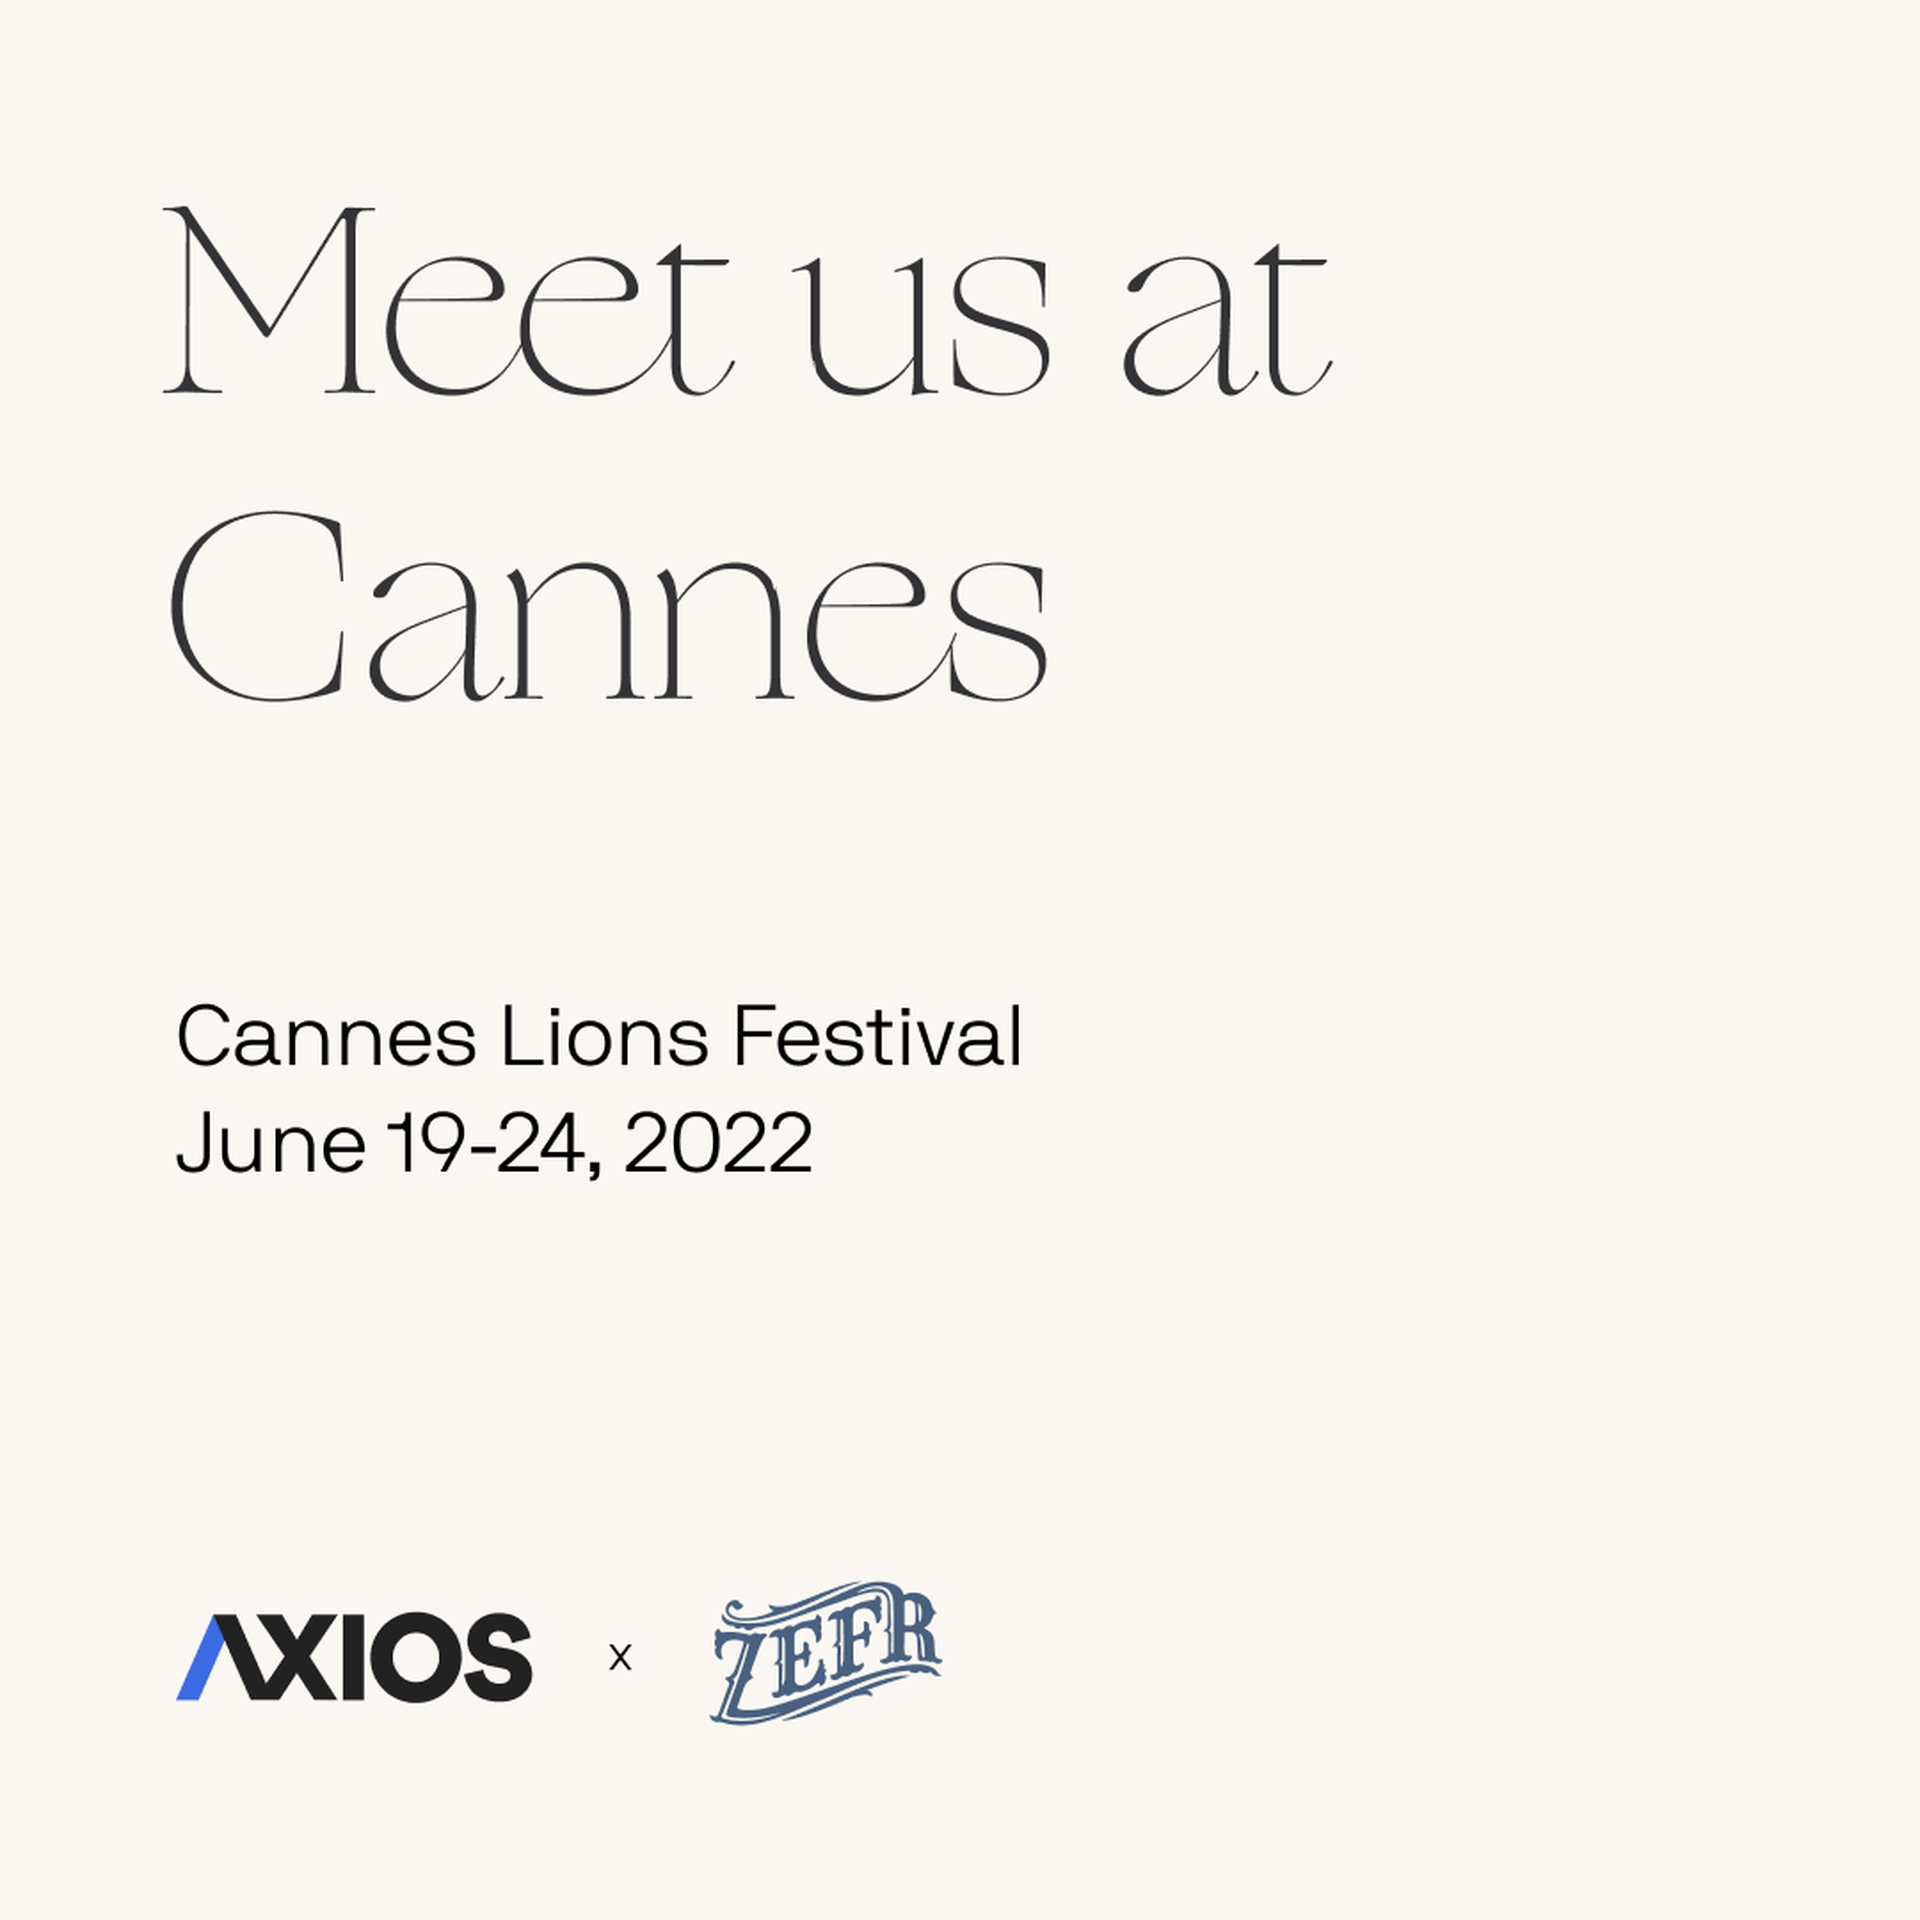 Meet us at Cannes